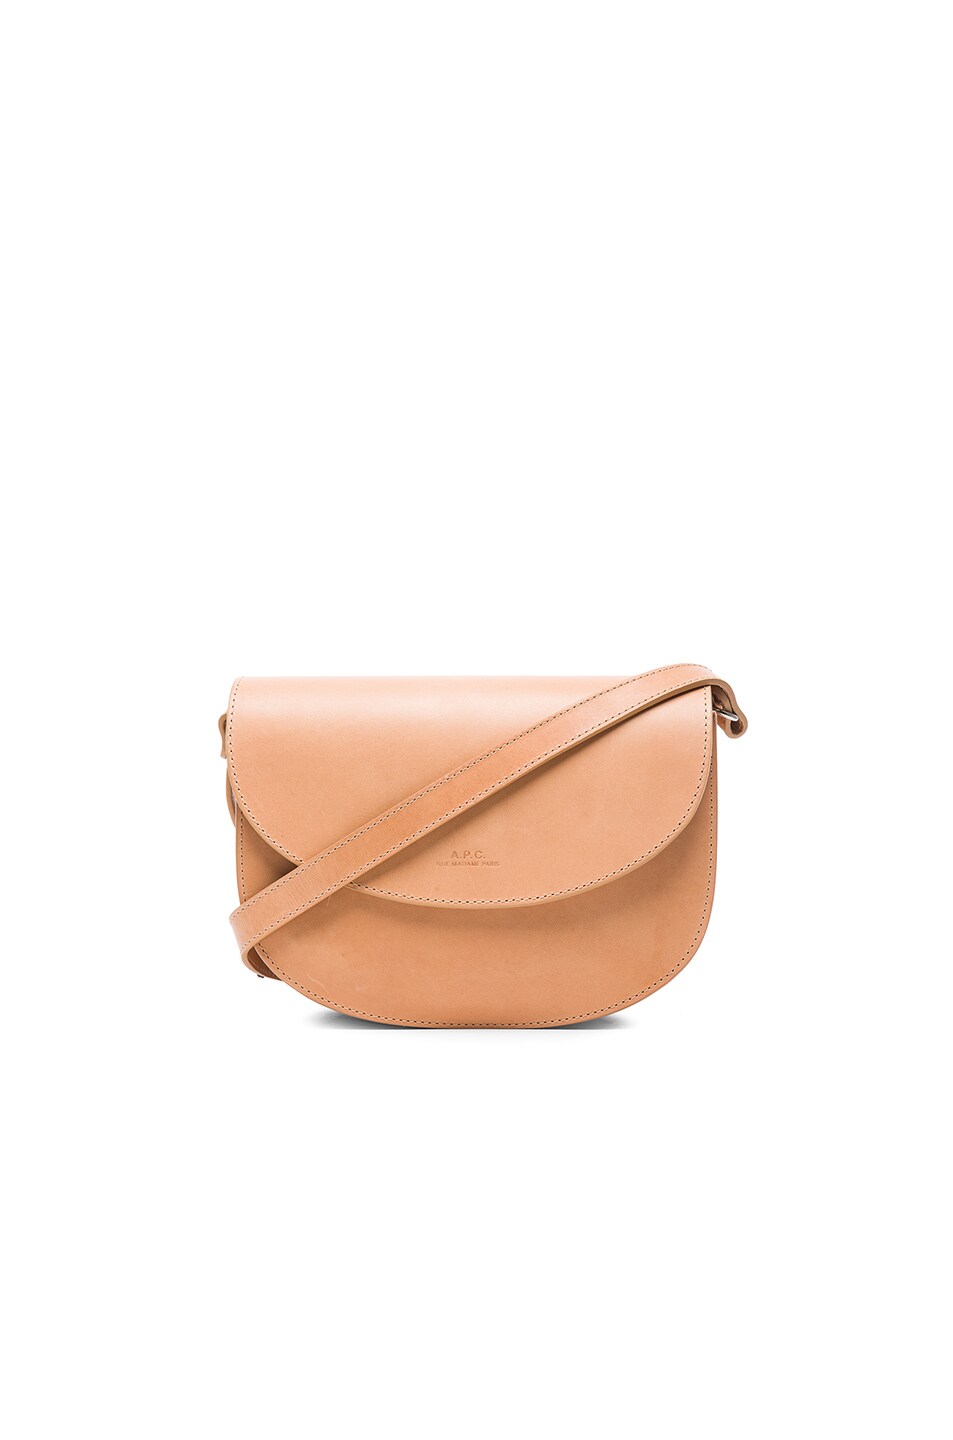 Image 1 of A.P.C. Luxembourg Bag in Beige Natural